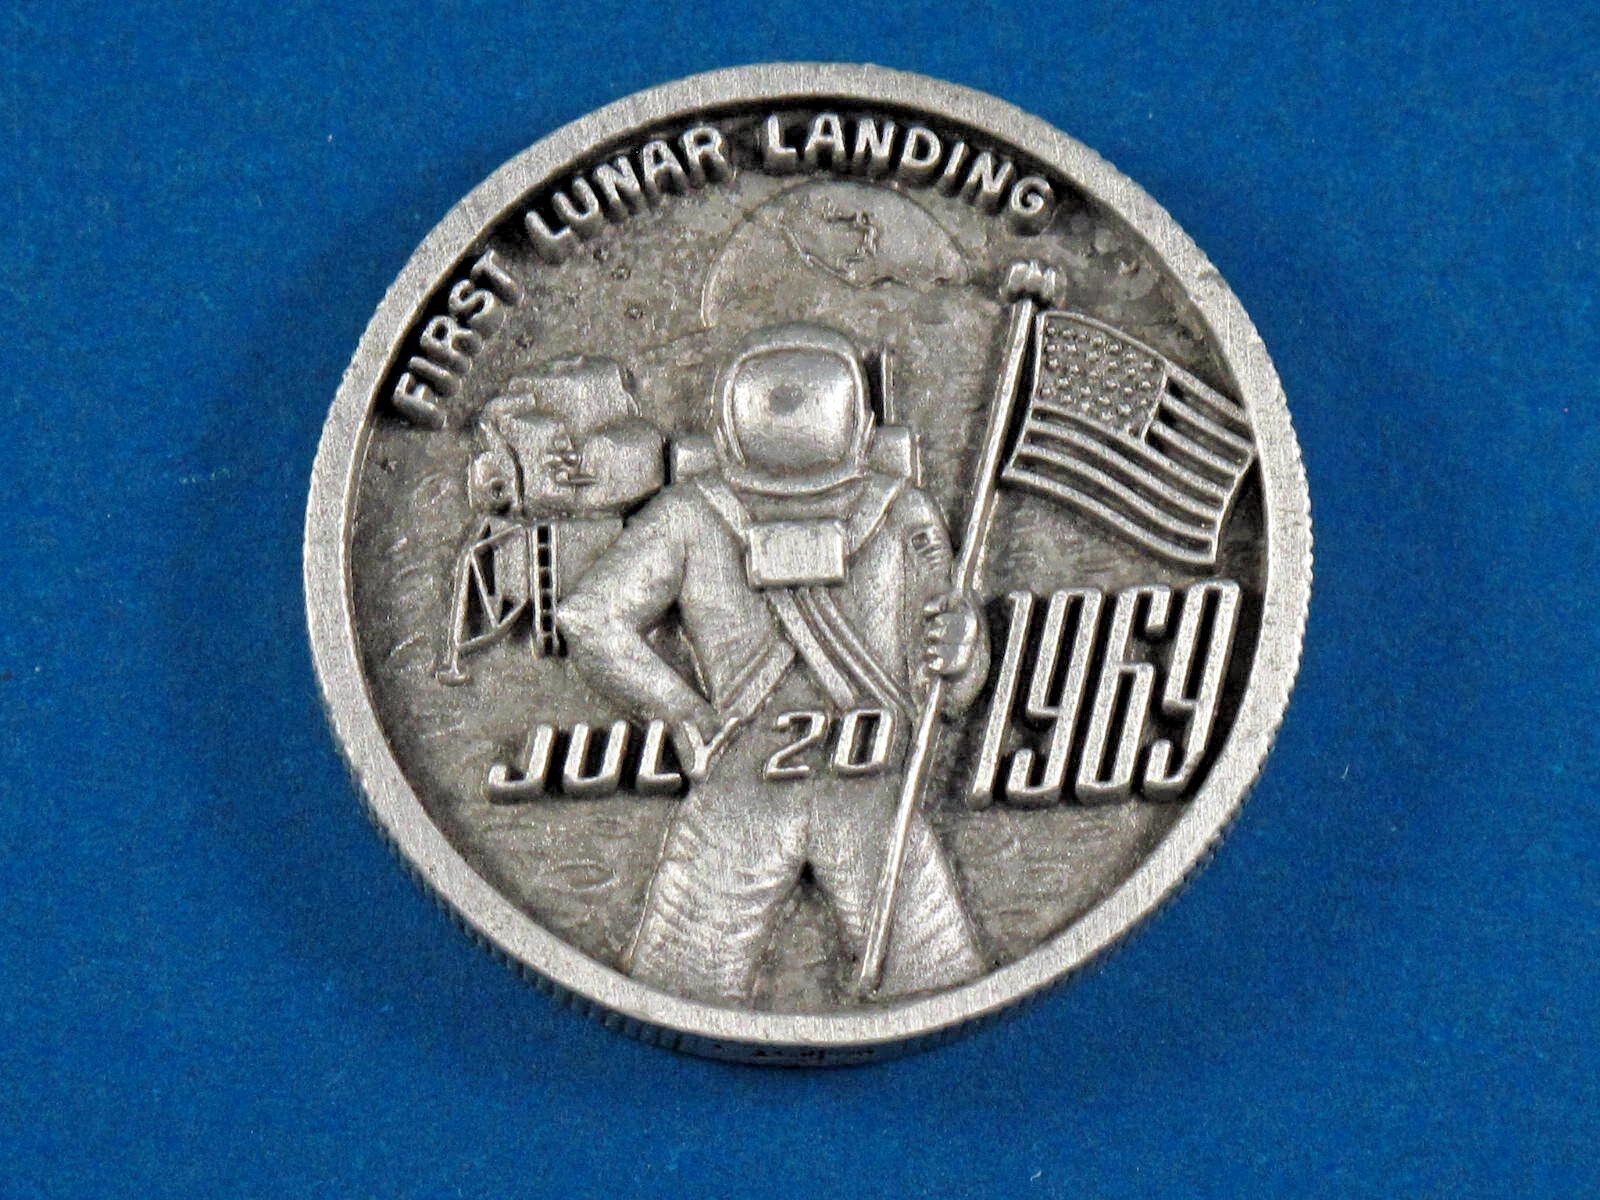 Apollo 11 First Lunar Landing Medal 1969 by LG Balfour Co. July 20, 1969